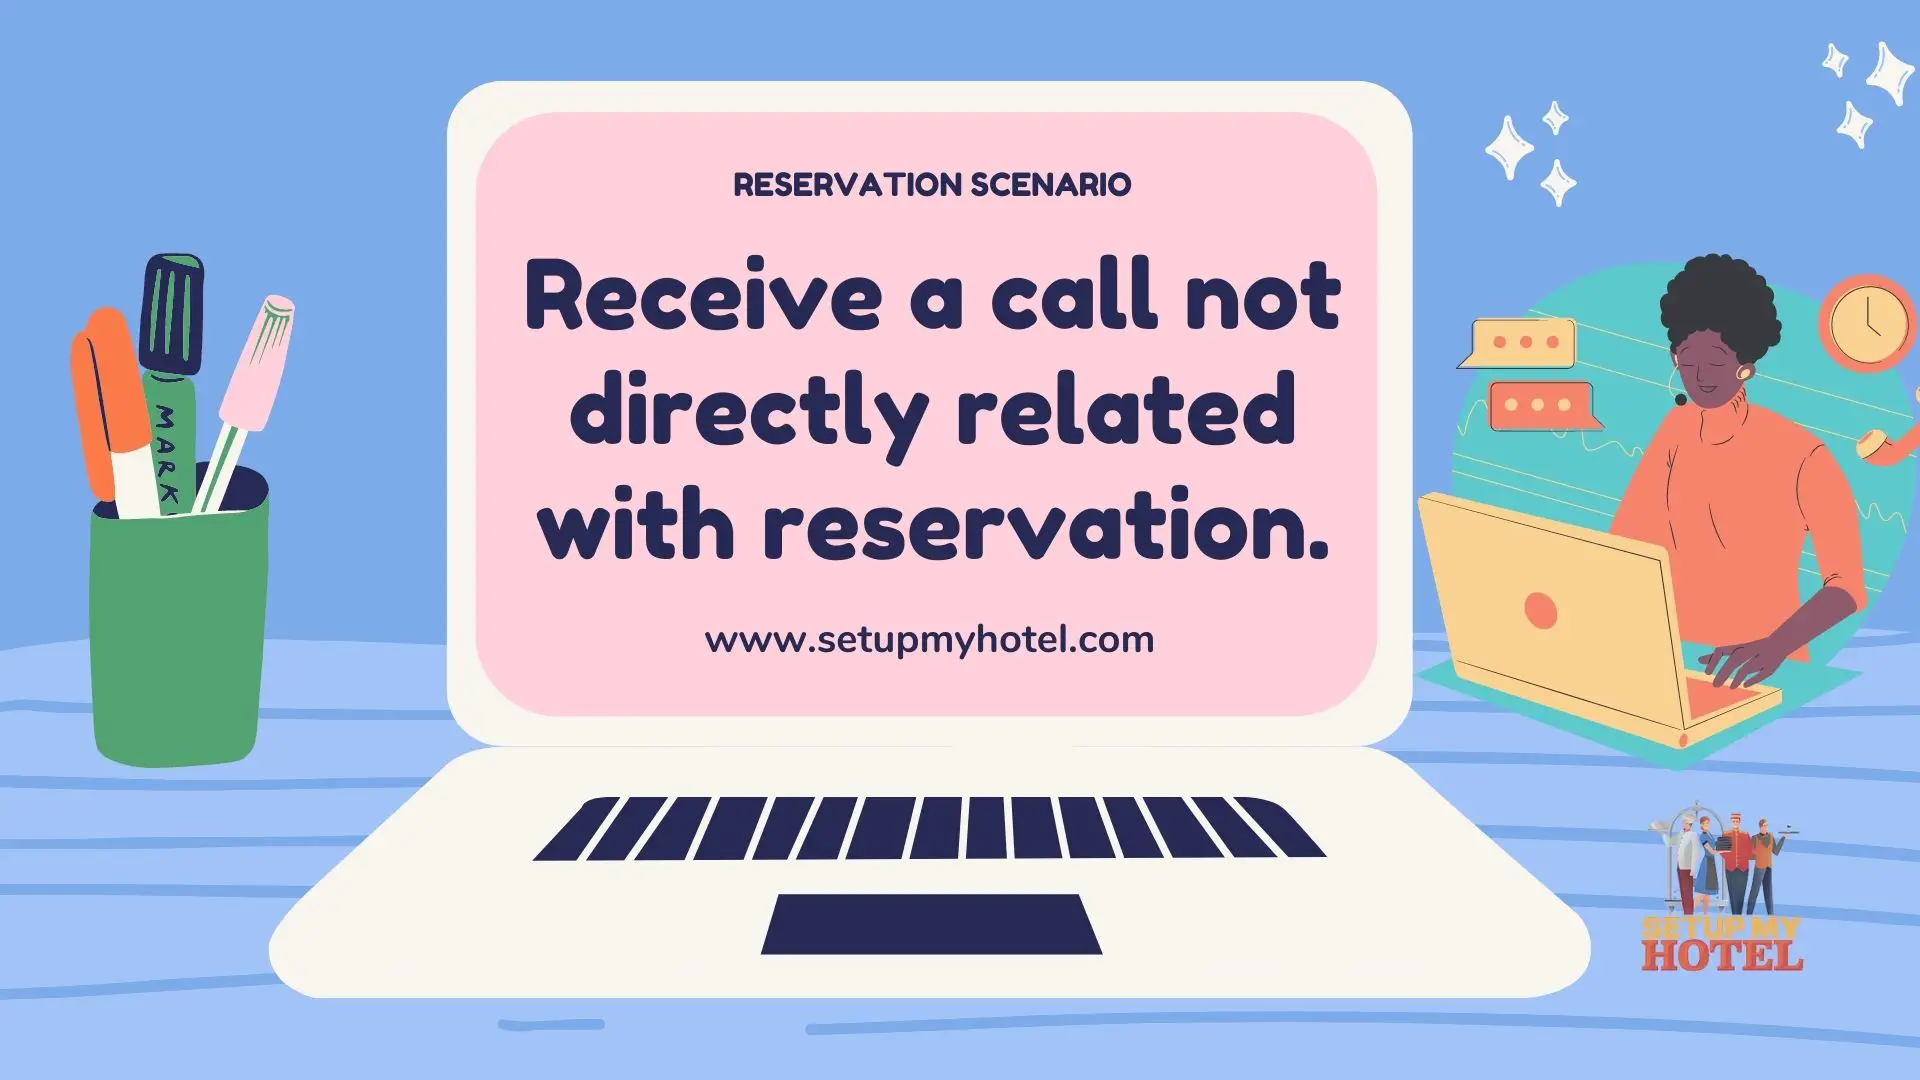 Handling a call that is not directly related to reservations but requires assistance in a reservation scenario involves being adaptable and providing helpful information or directing the caller to the appropriate department. Here's an example of how a reservation representative might handle such a call: